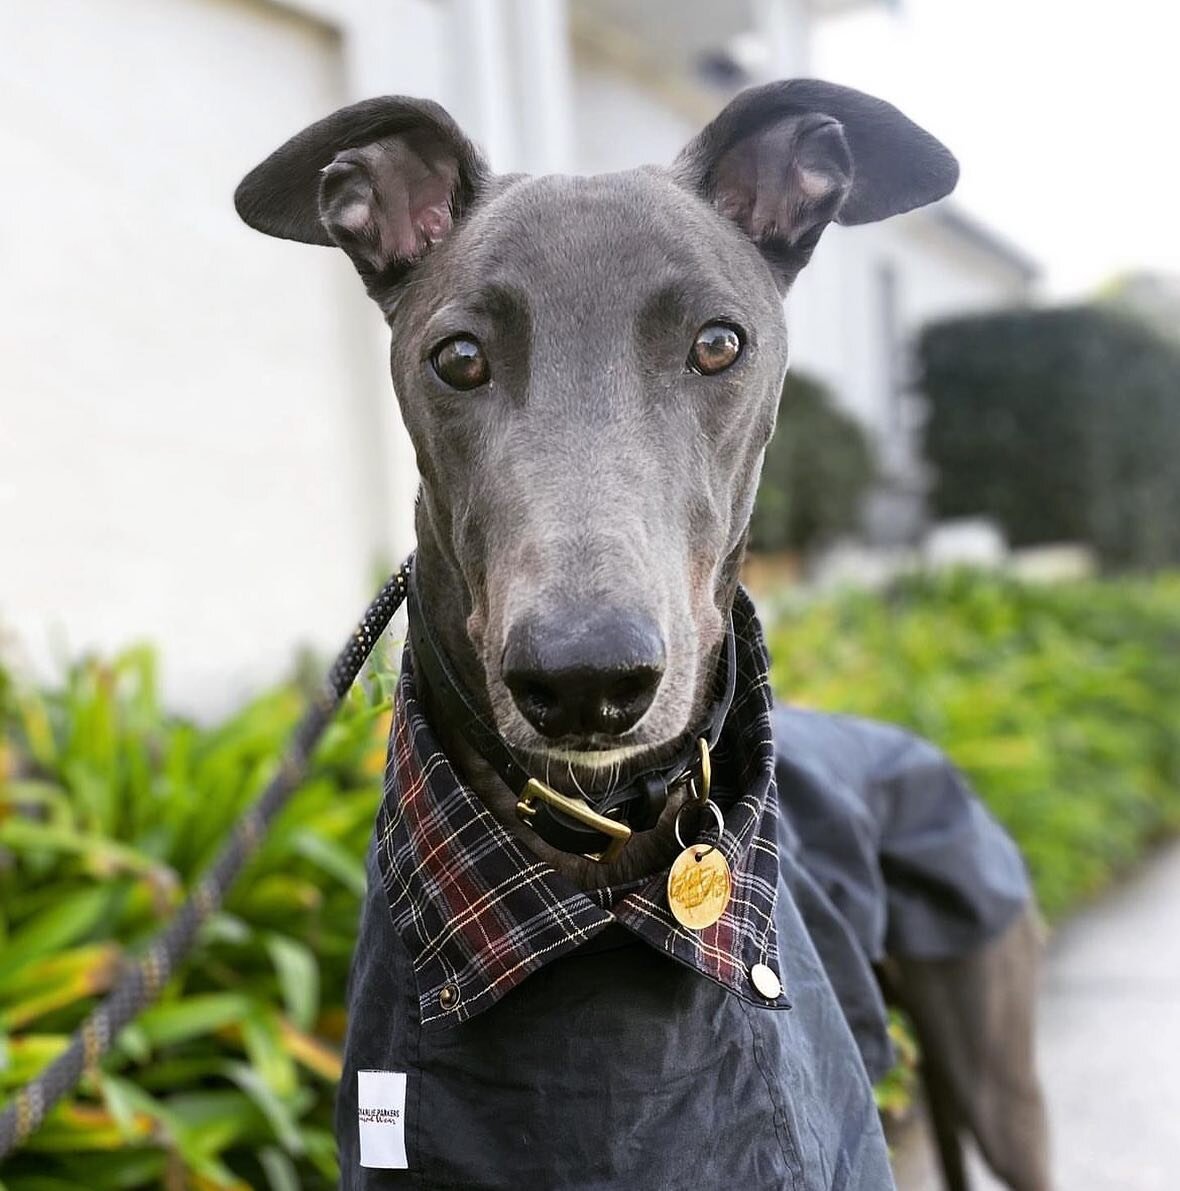 We have restocked a few #greyhound sizes, next we will be restocking the greyhound size in our yellow Paddington. If you have any requests comment below. 
.
📸@50shadesofdexter_ 
.
#greyhoundsofinstagram #greyhound_feature #greyhoundsmakegreatpets #g